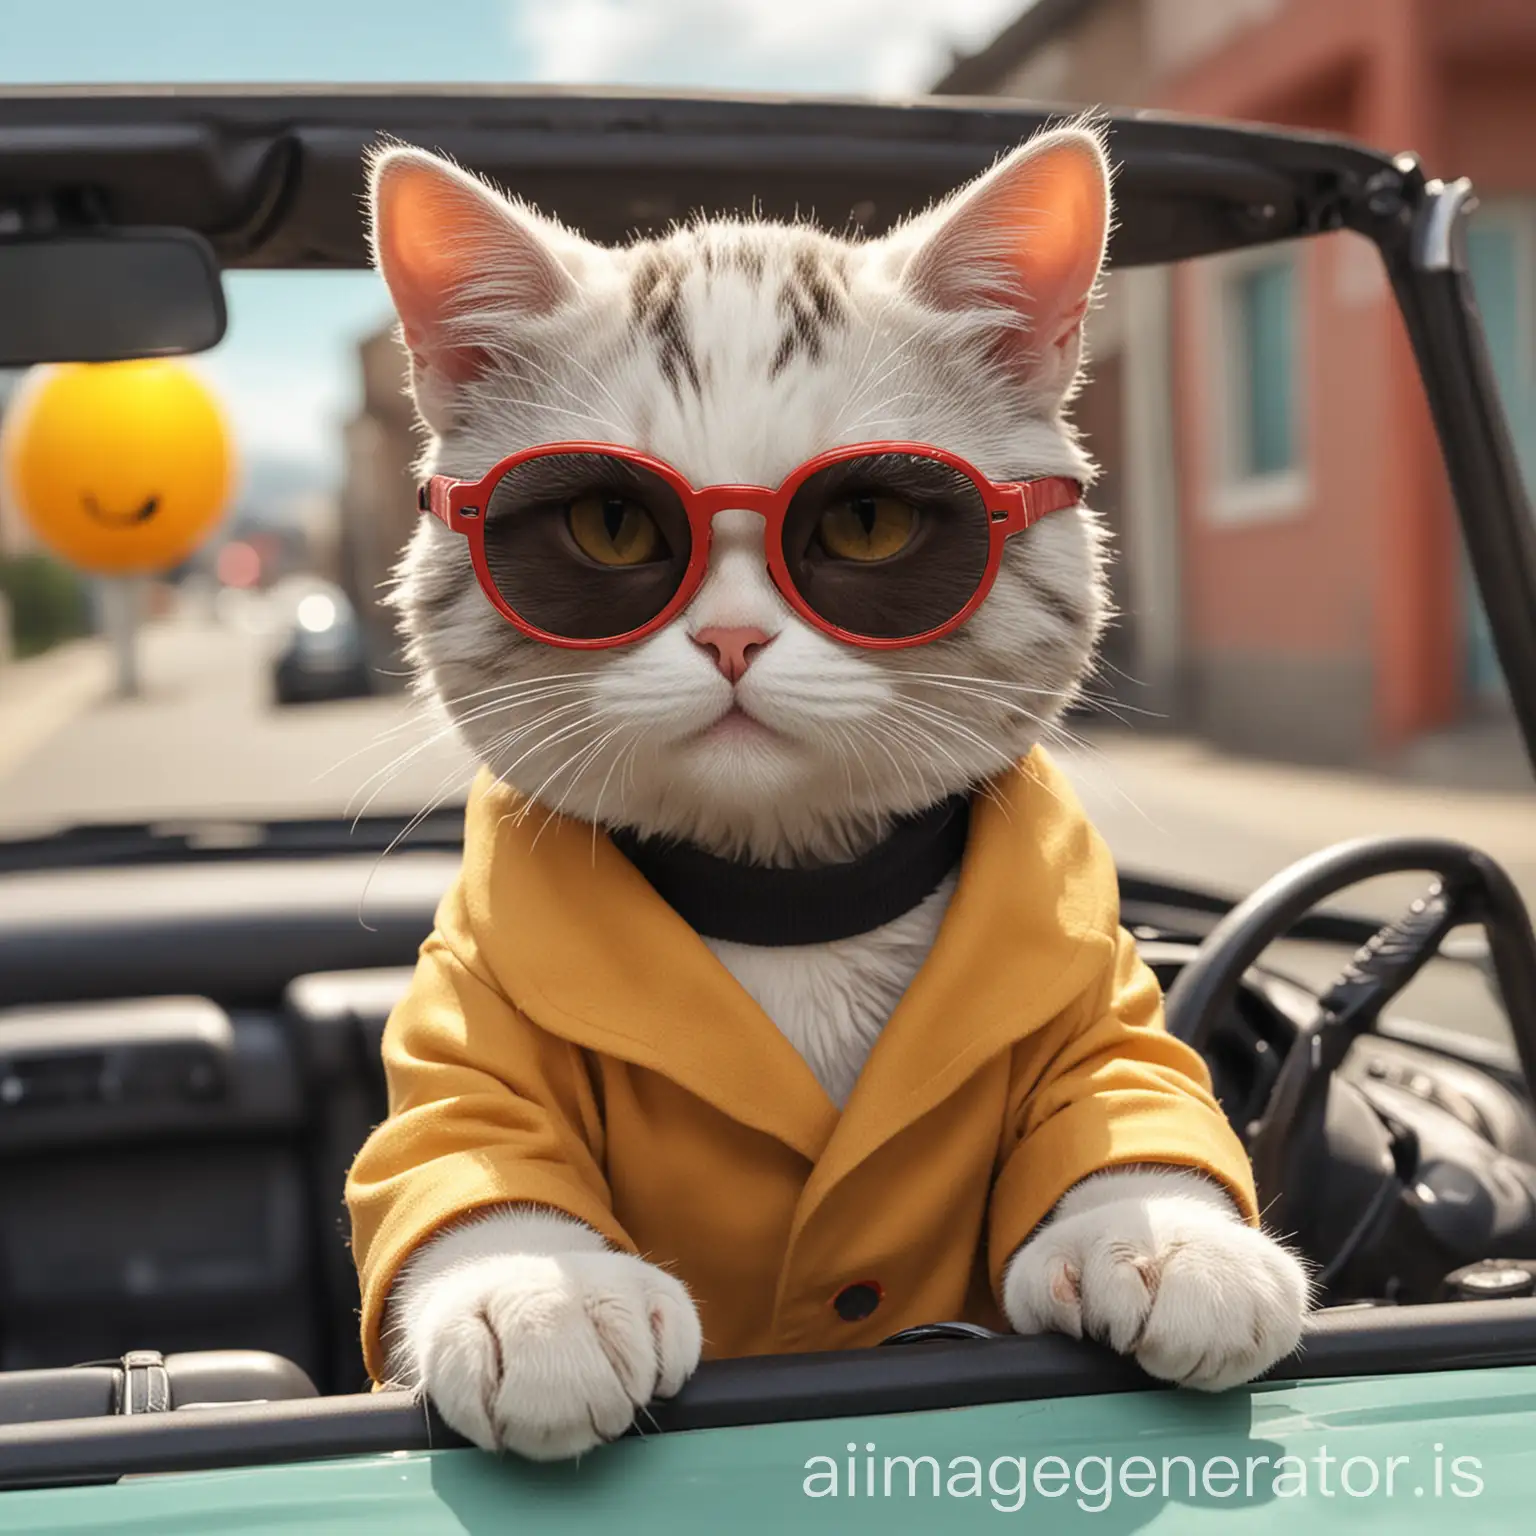 Cartoon-Cat-Driving-Car-with-Sunglasses-Mask-and-Coat